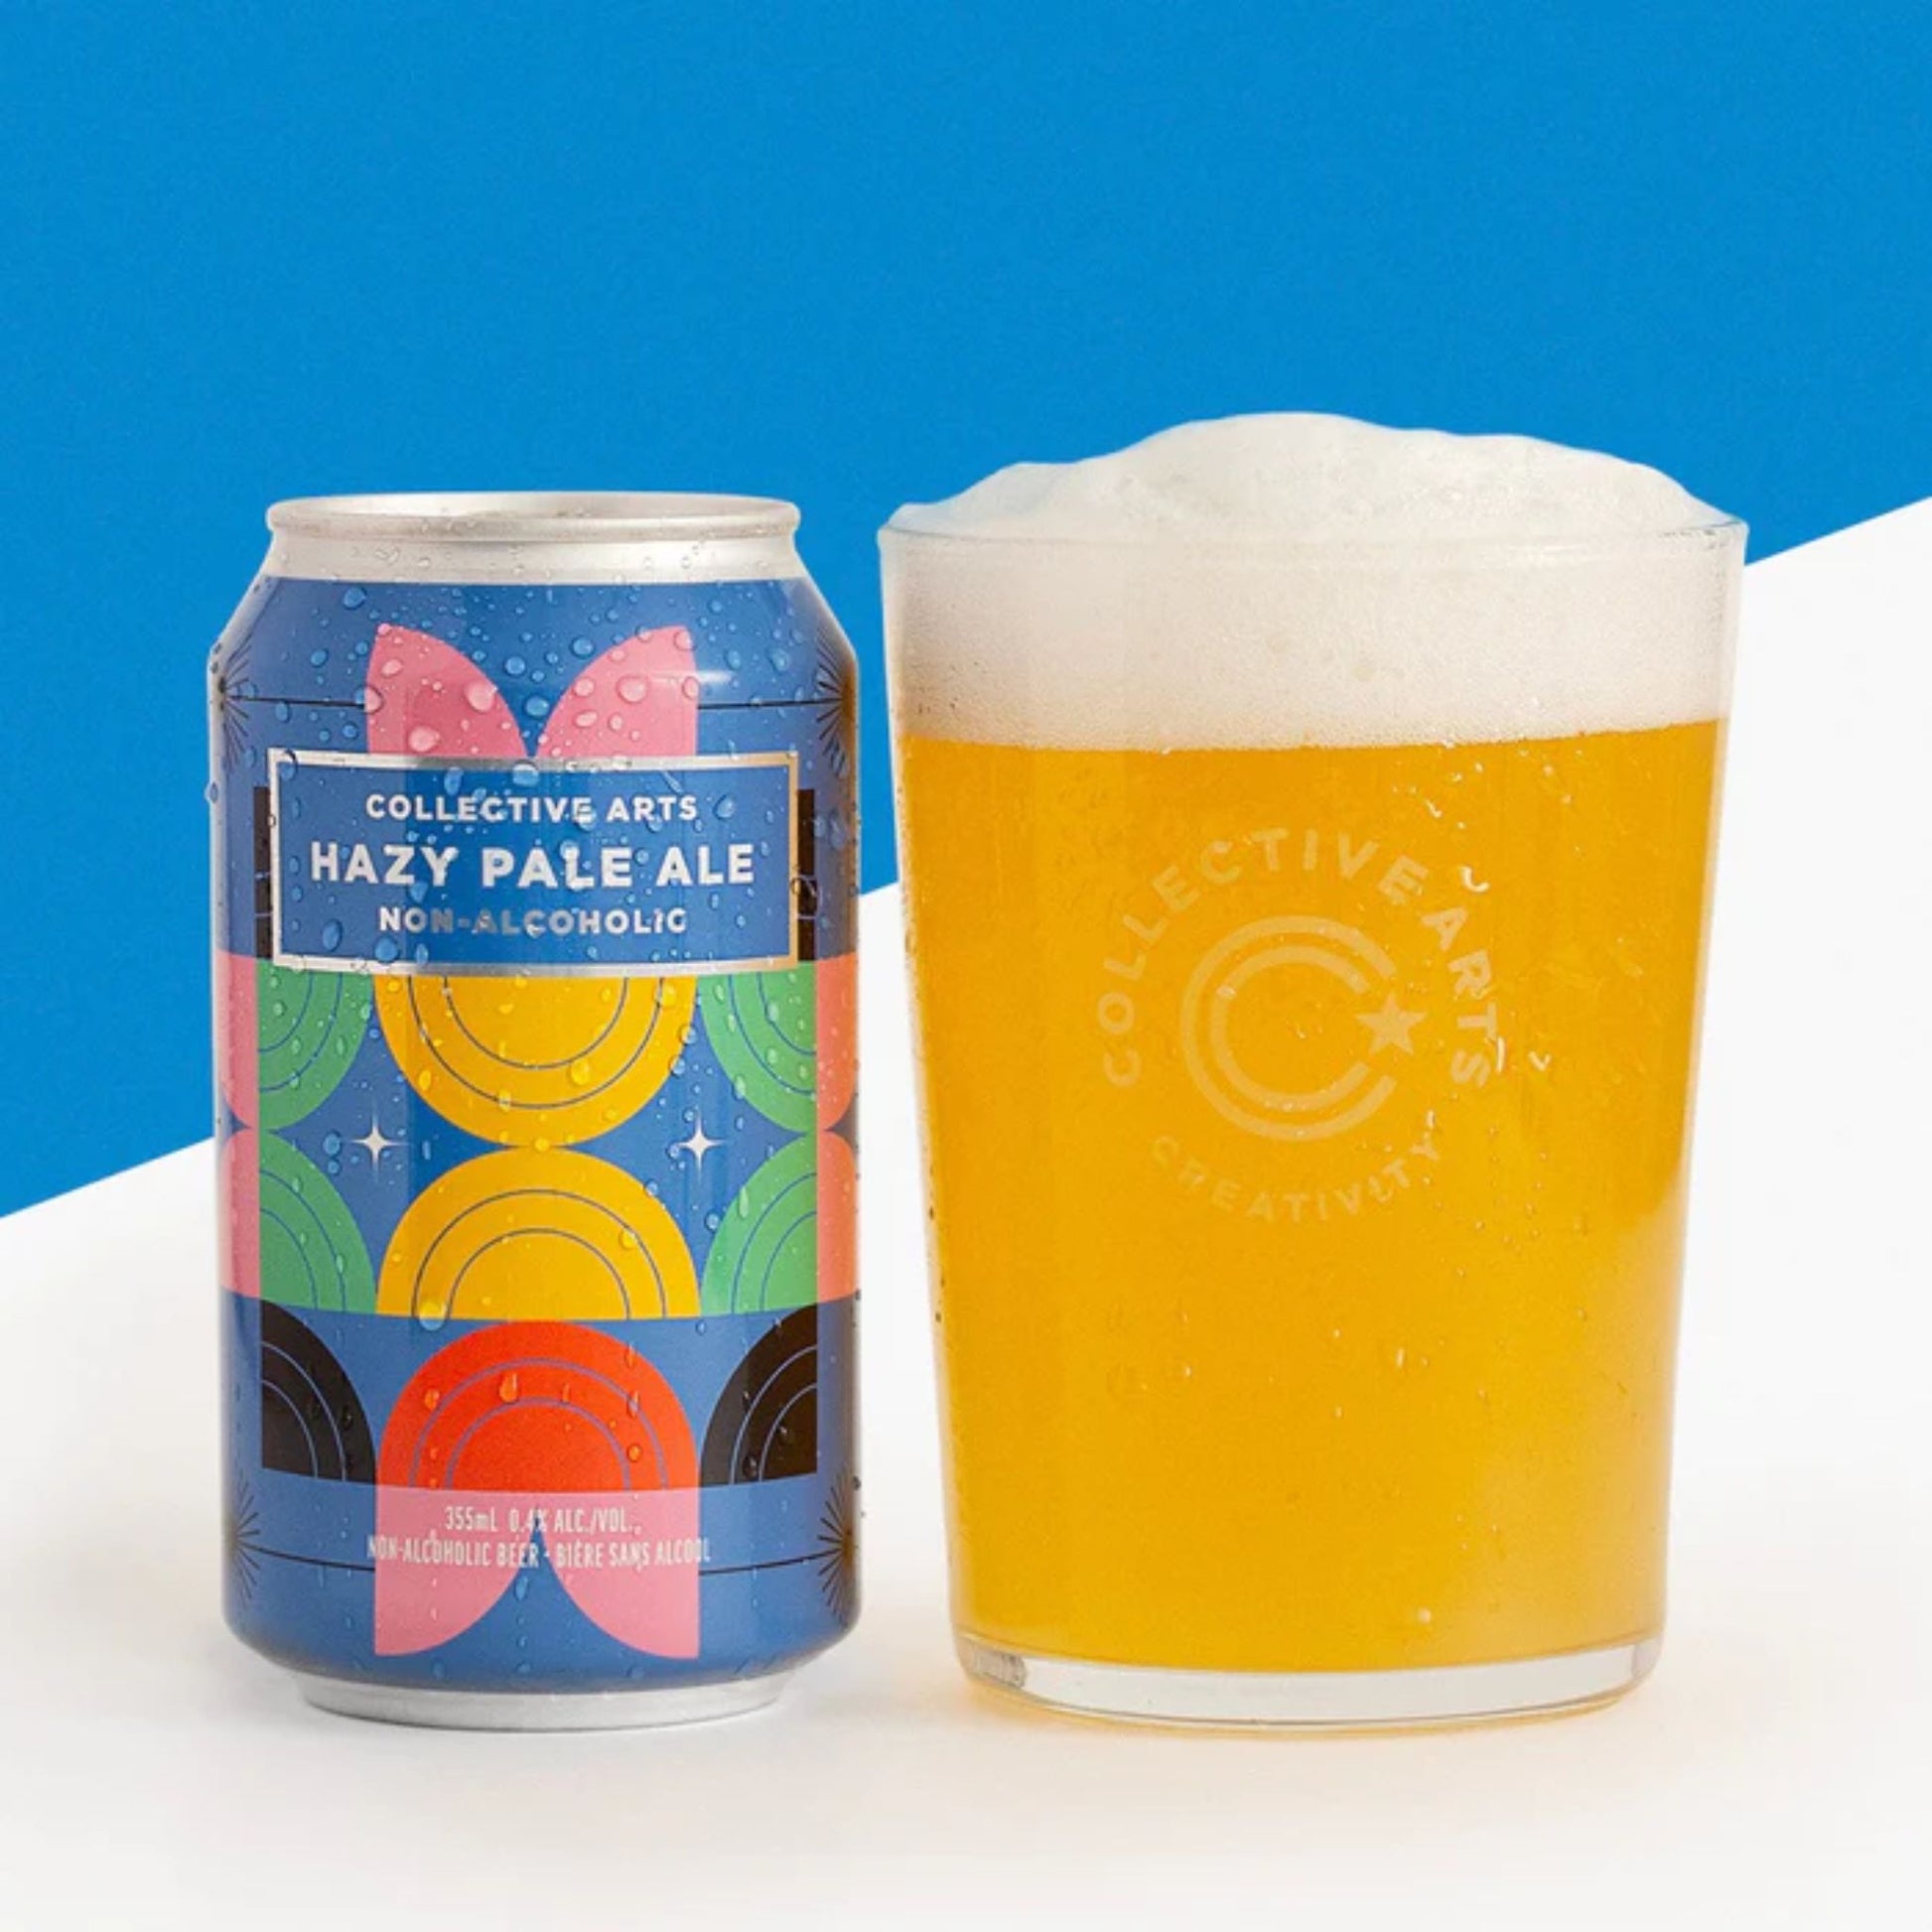 Collective Arts Non-Alcoholic Hazy Pale Ale is available at Knyota Drinks in Ottawa.